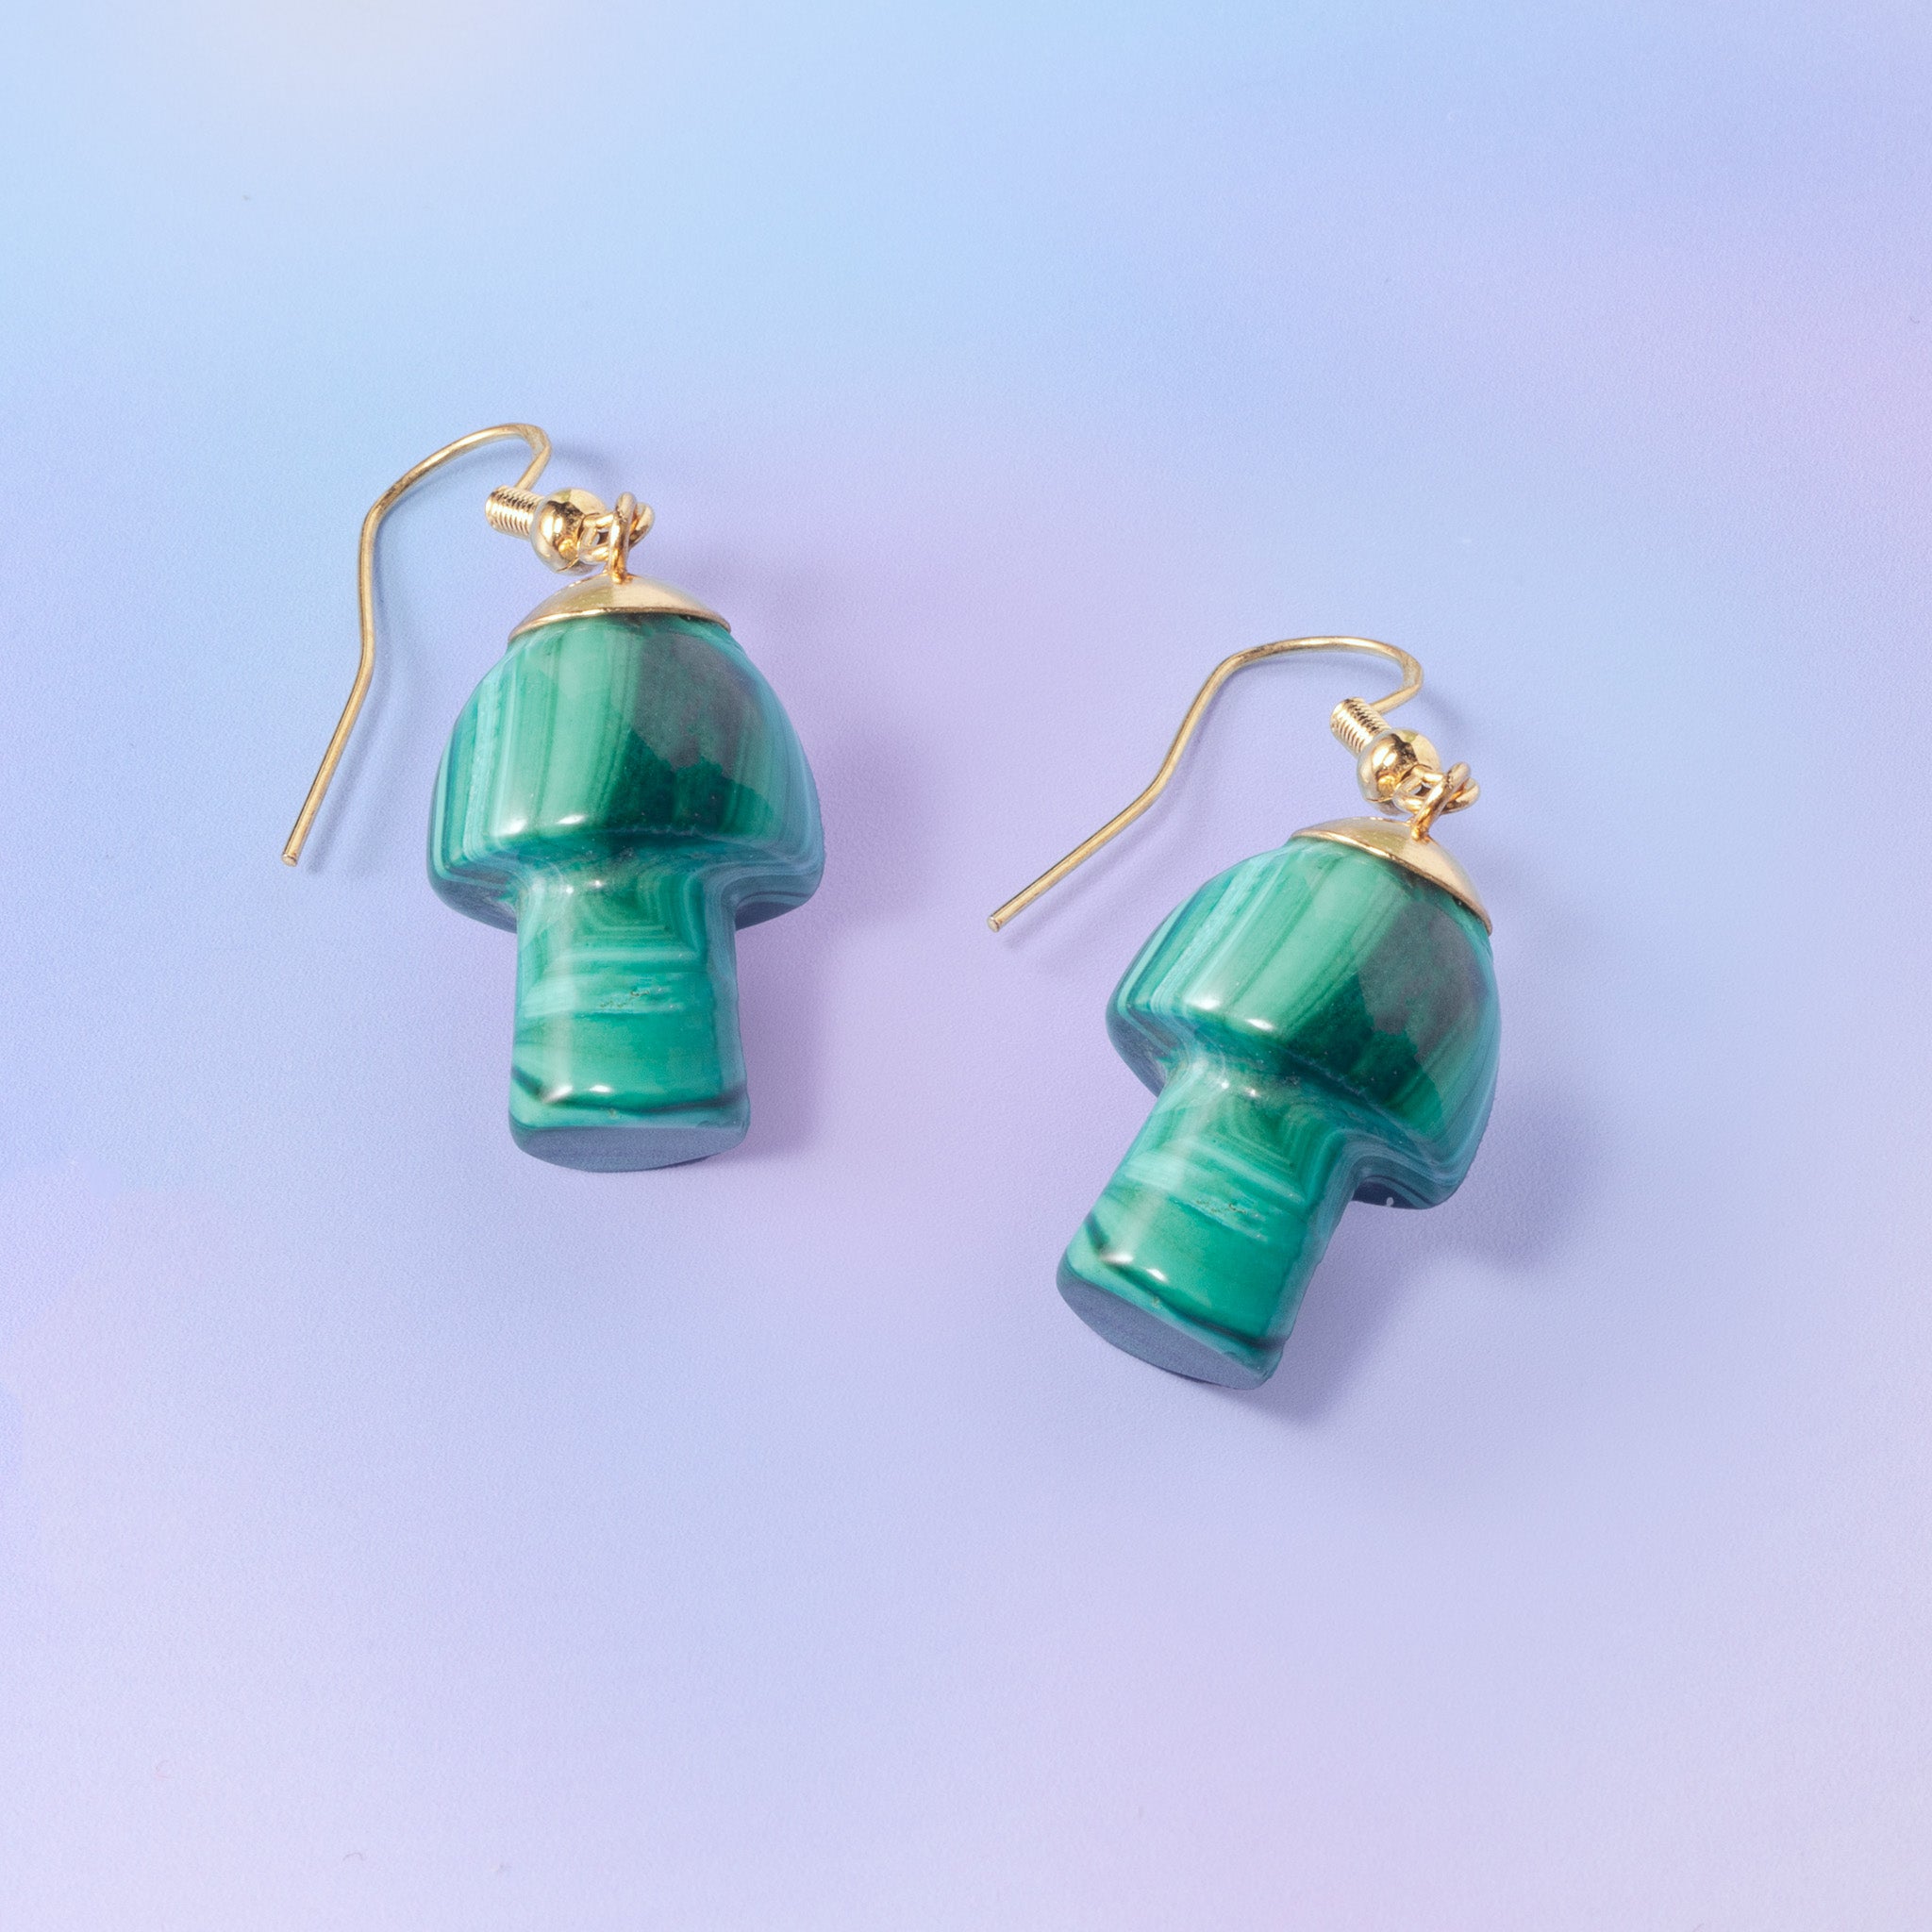 a pair of green earrings on a blue background